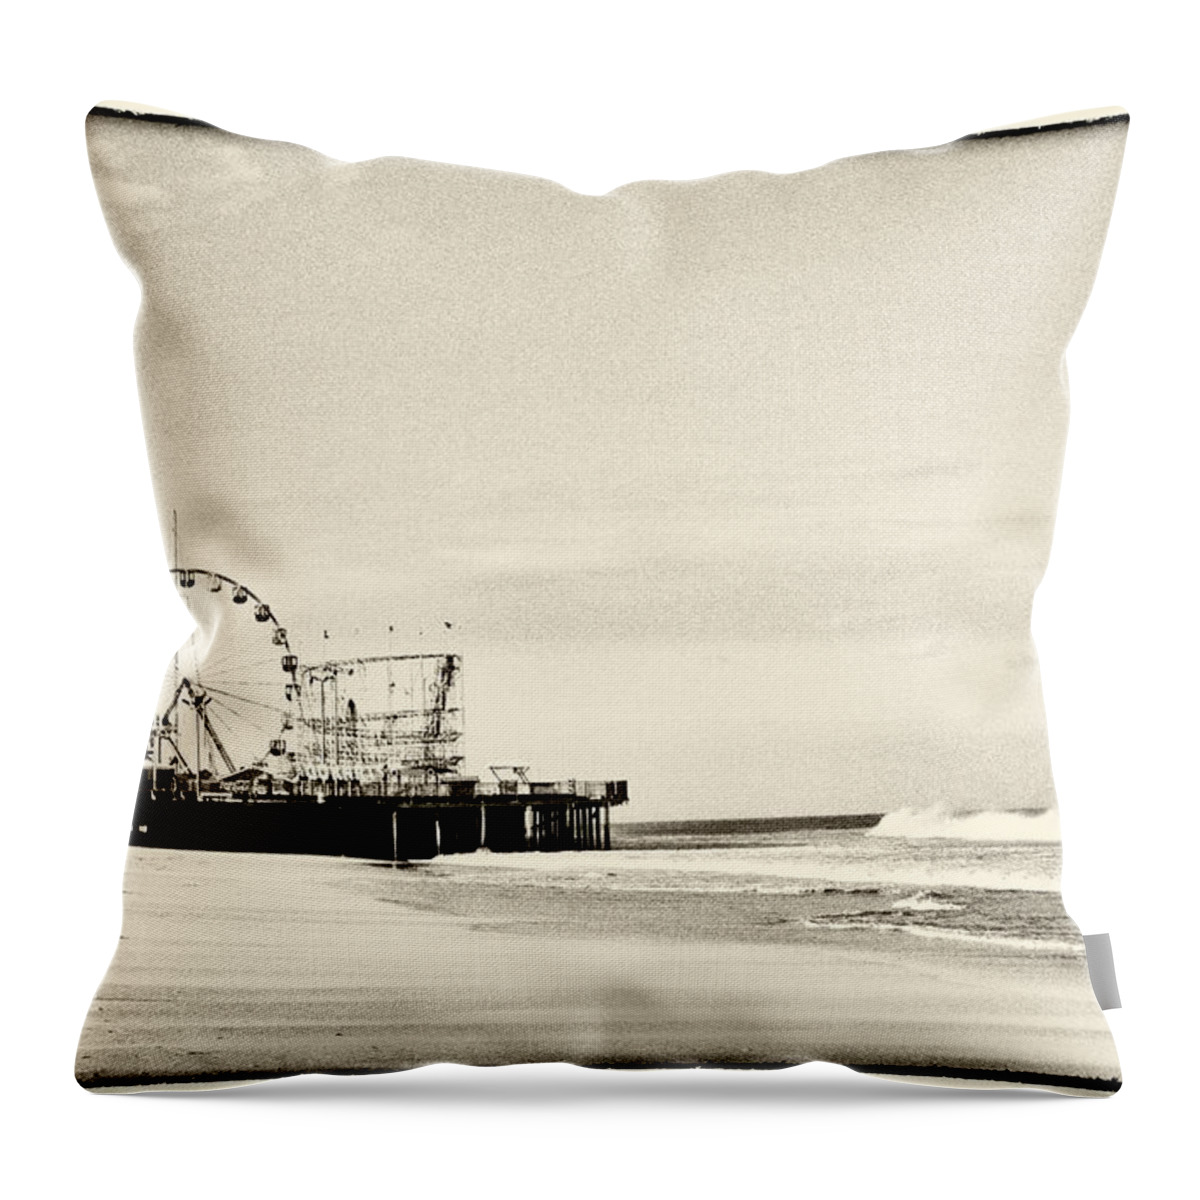 Seaside Heights Funtown Pier Vintage Throw Pillow featuring the photograph Seaside Heights Funtown Pier Vintage by Terry DeLuco